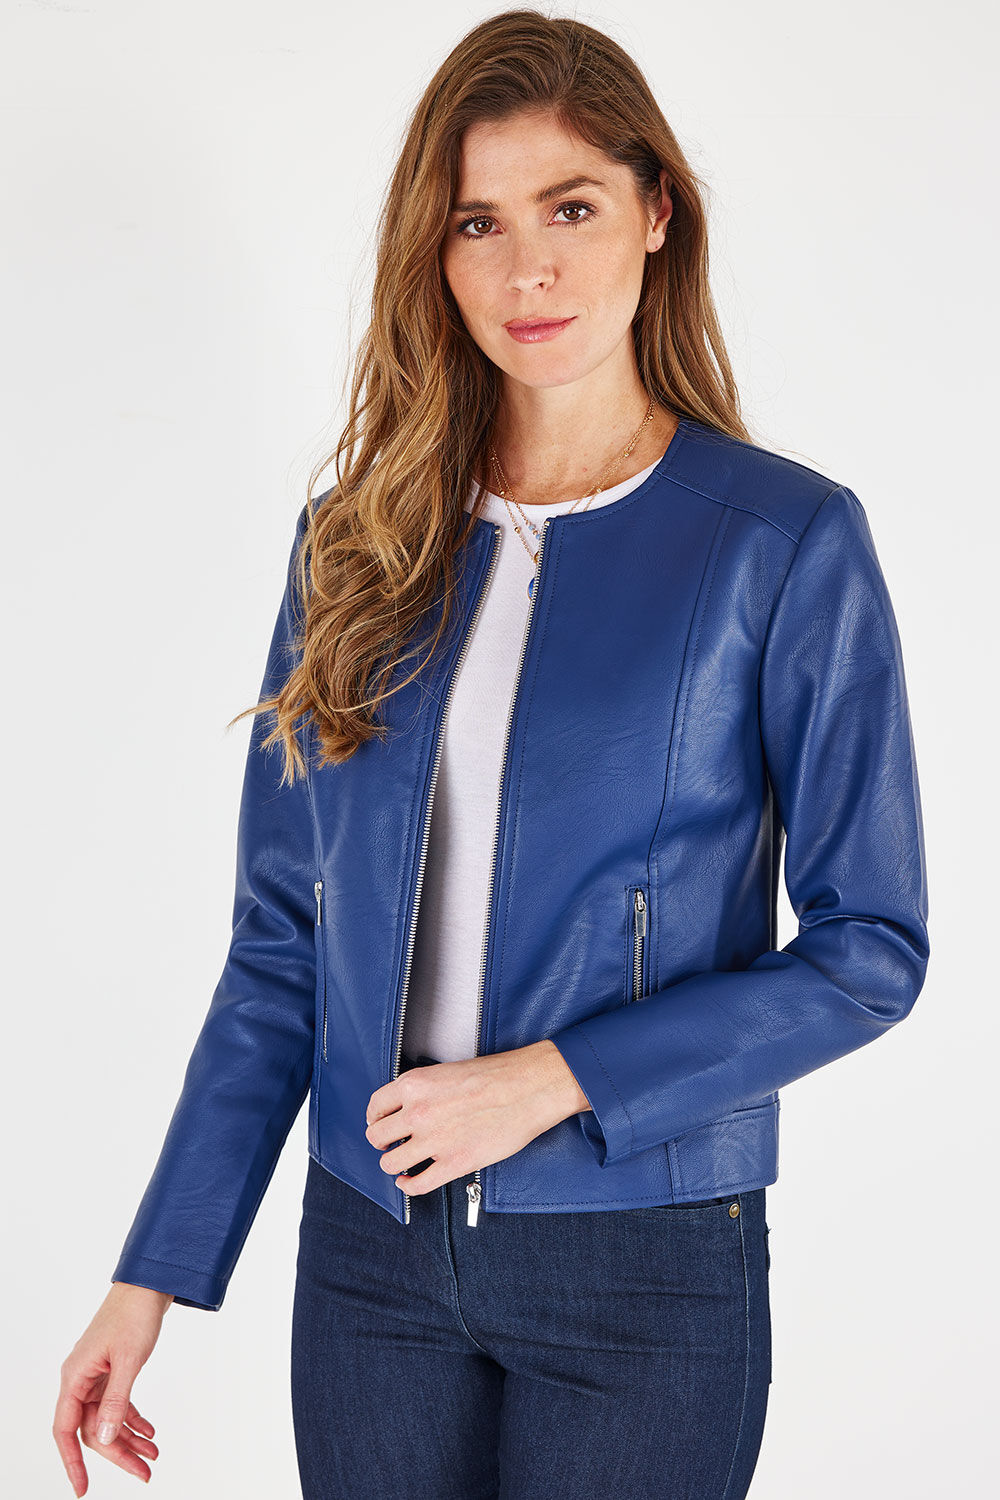 Bonmarche Navy Faux Leather Collarless Jacket, Size: 10